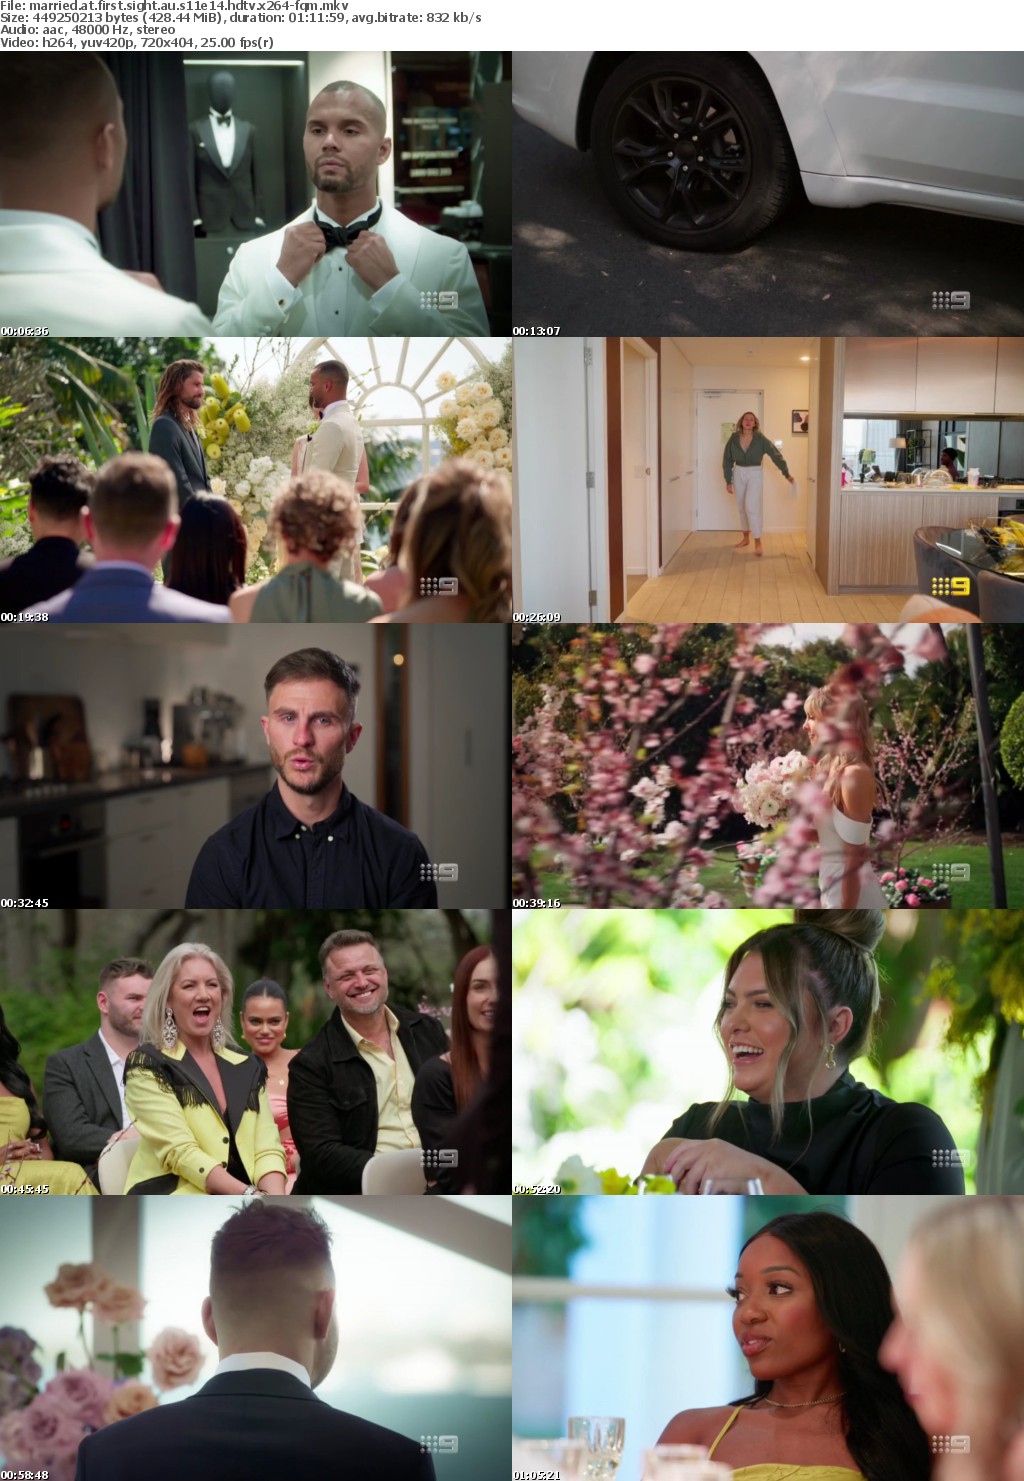 Married At First Sight AU S11E14 HDTV x264-FQM